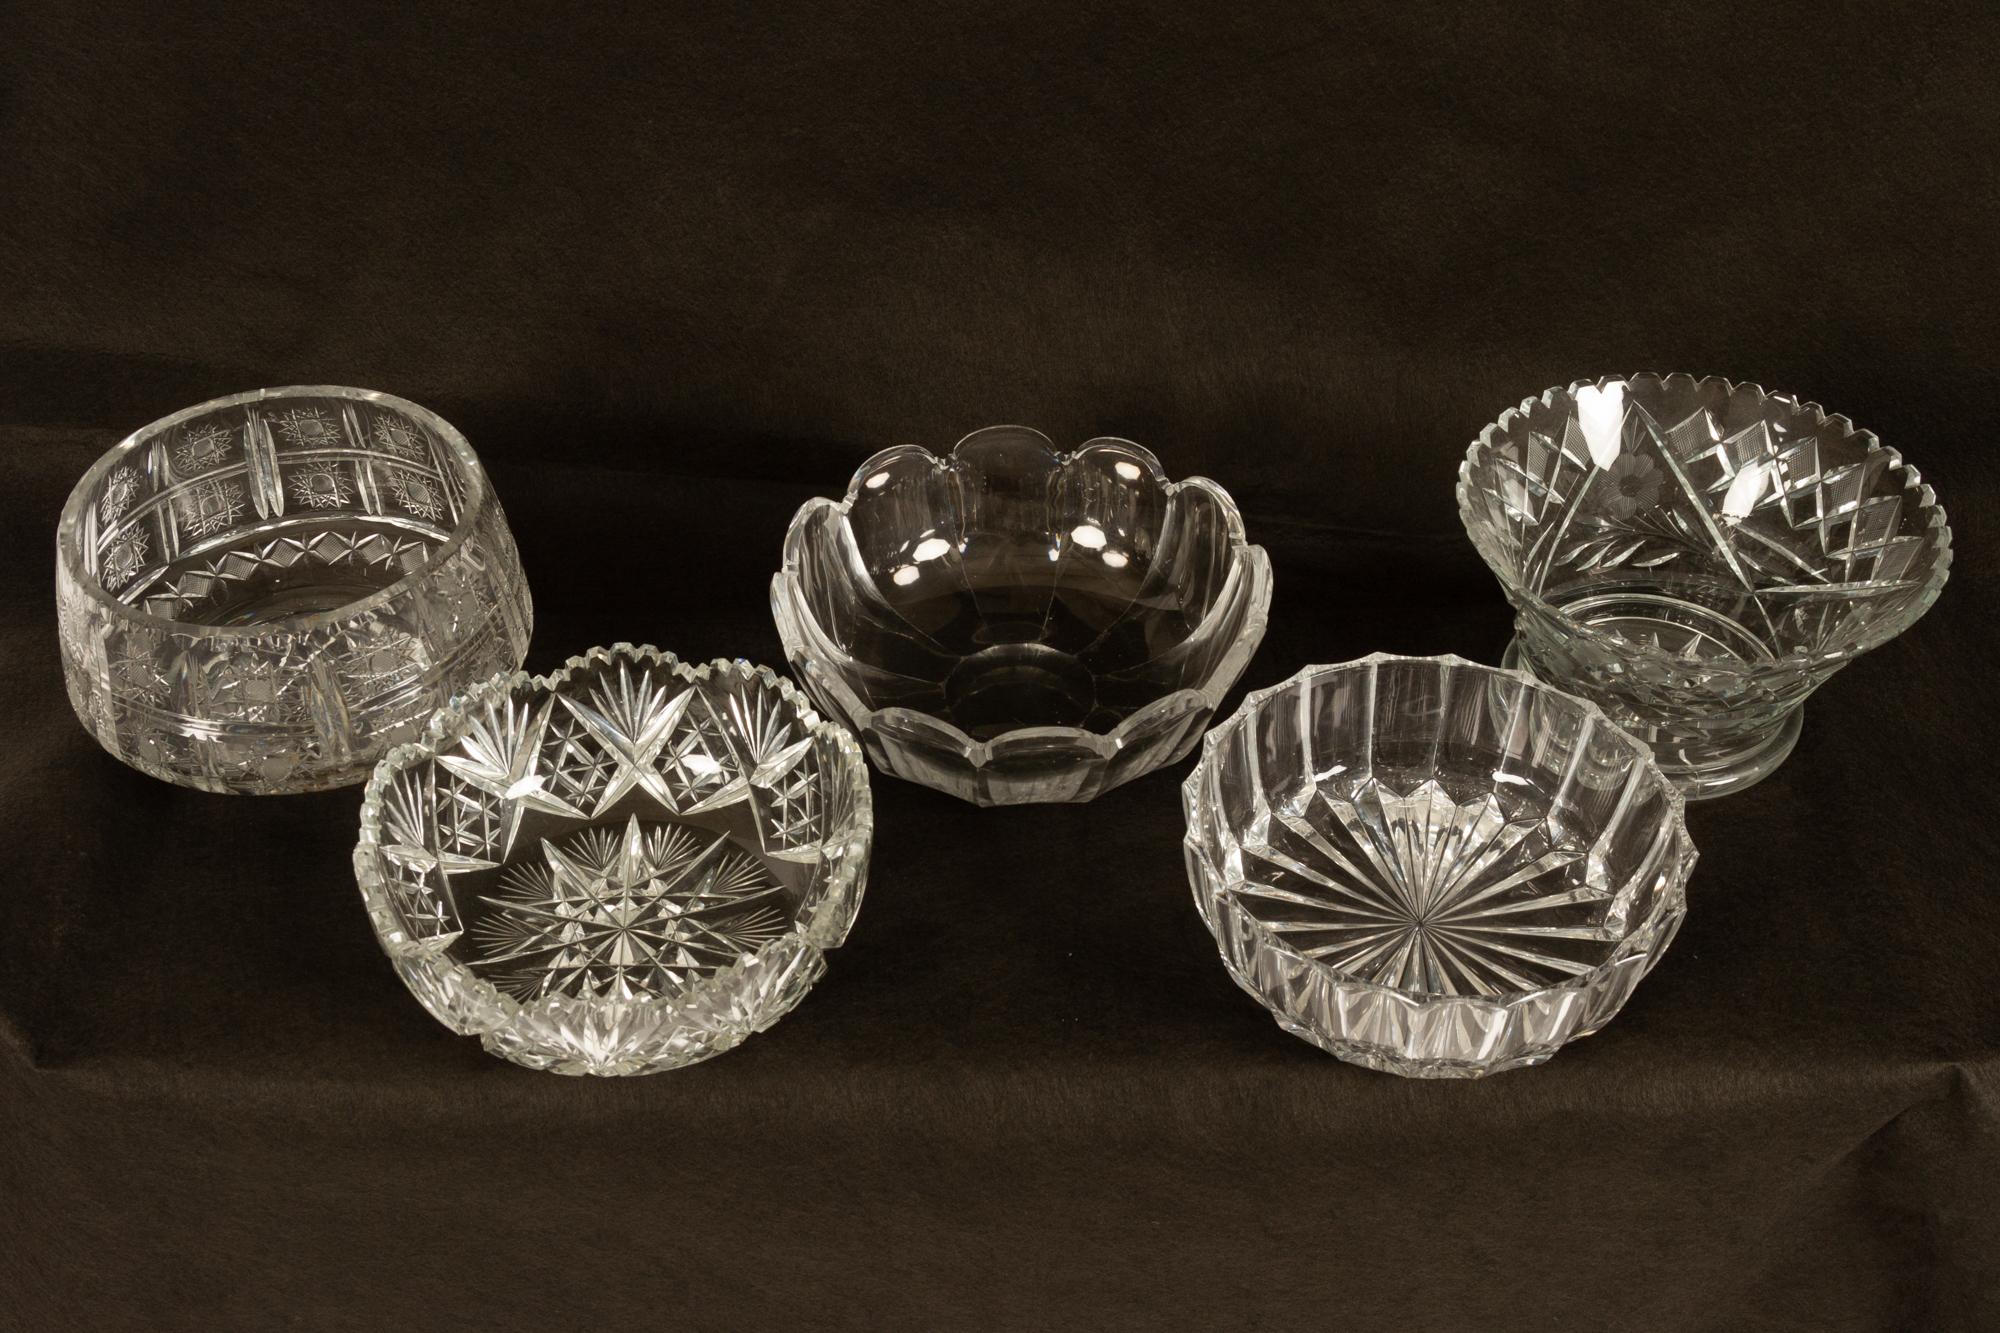 Five beautiful crystal bowls with different cuts.
Measuring between 21 and 31cm in width.
All in good condition with no chips or cracks.